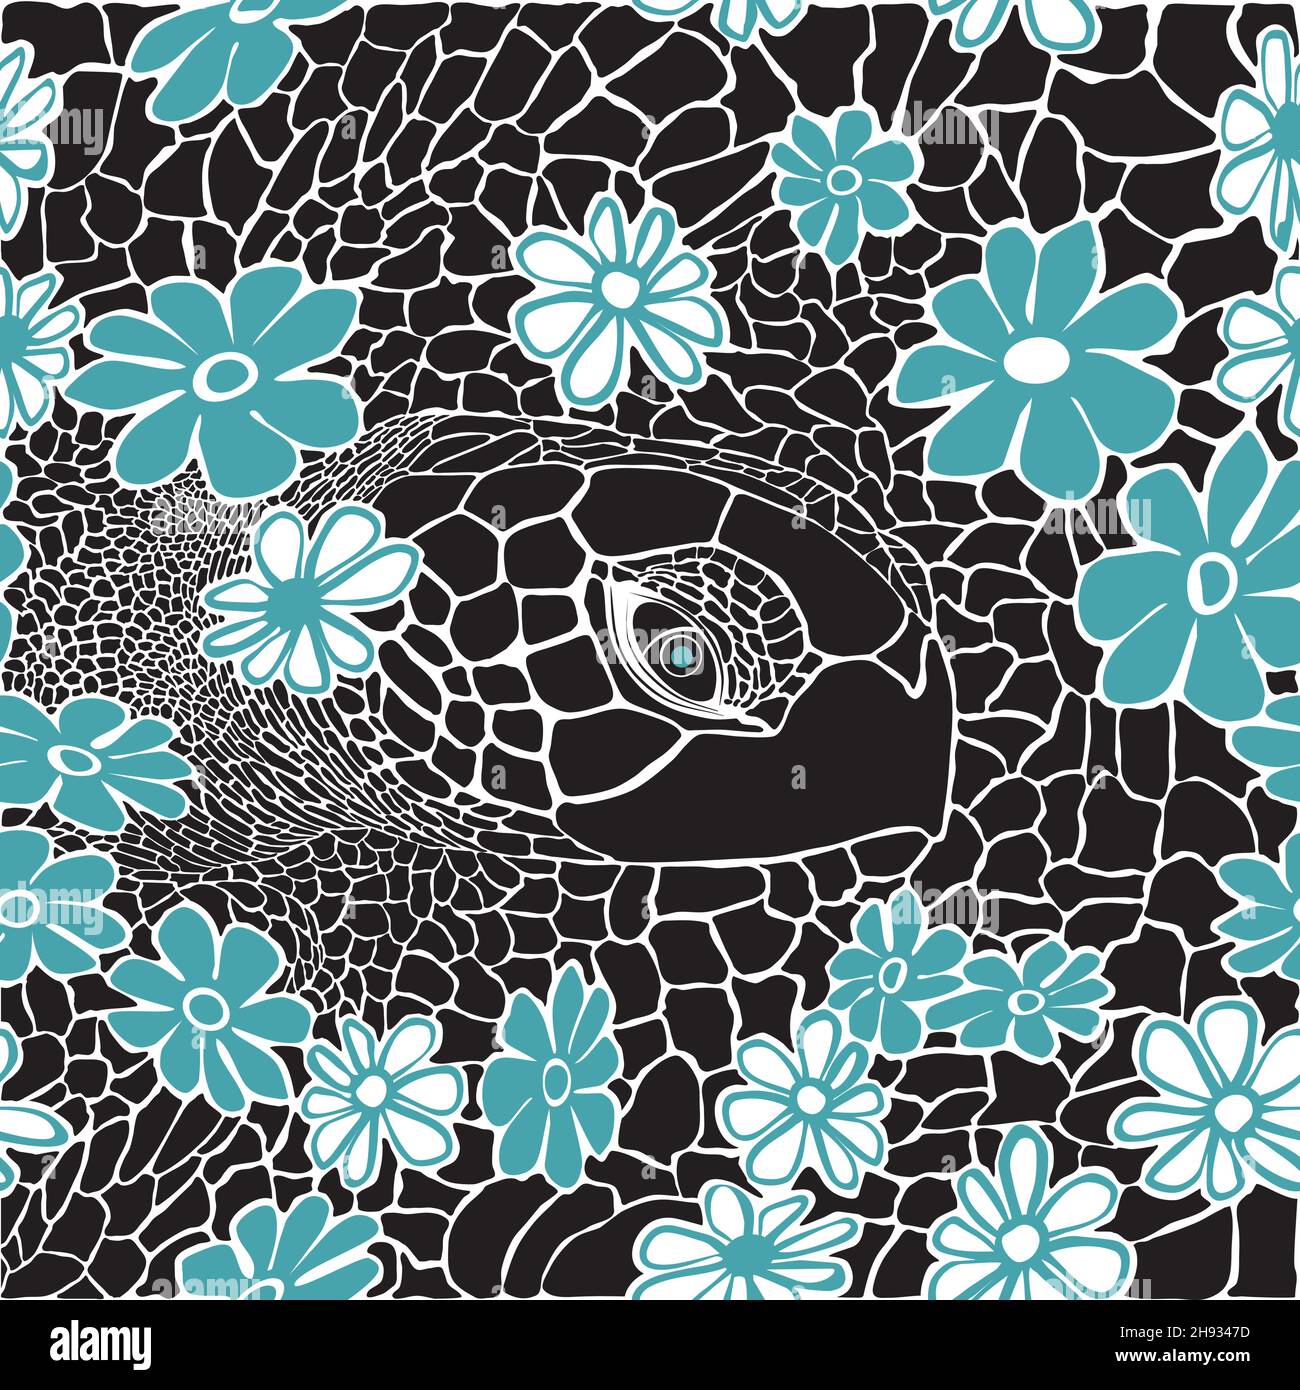 Background formed by a turtle and flowers Stock Vector